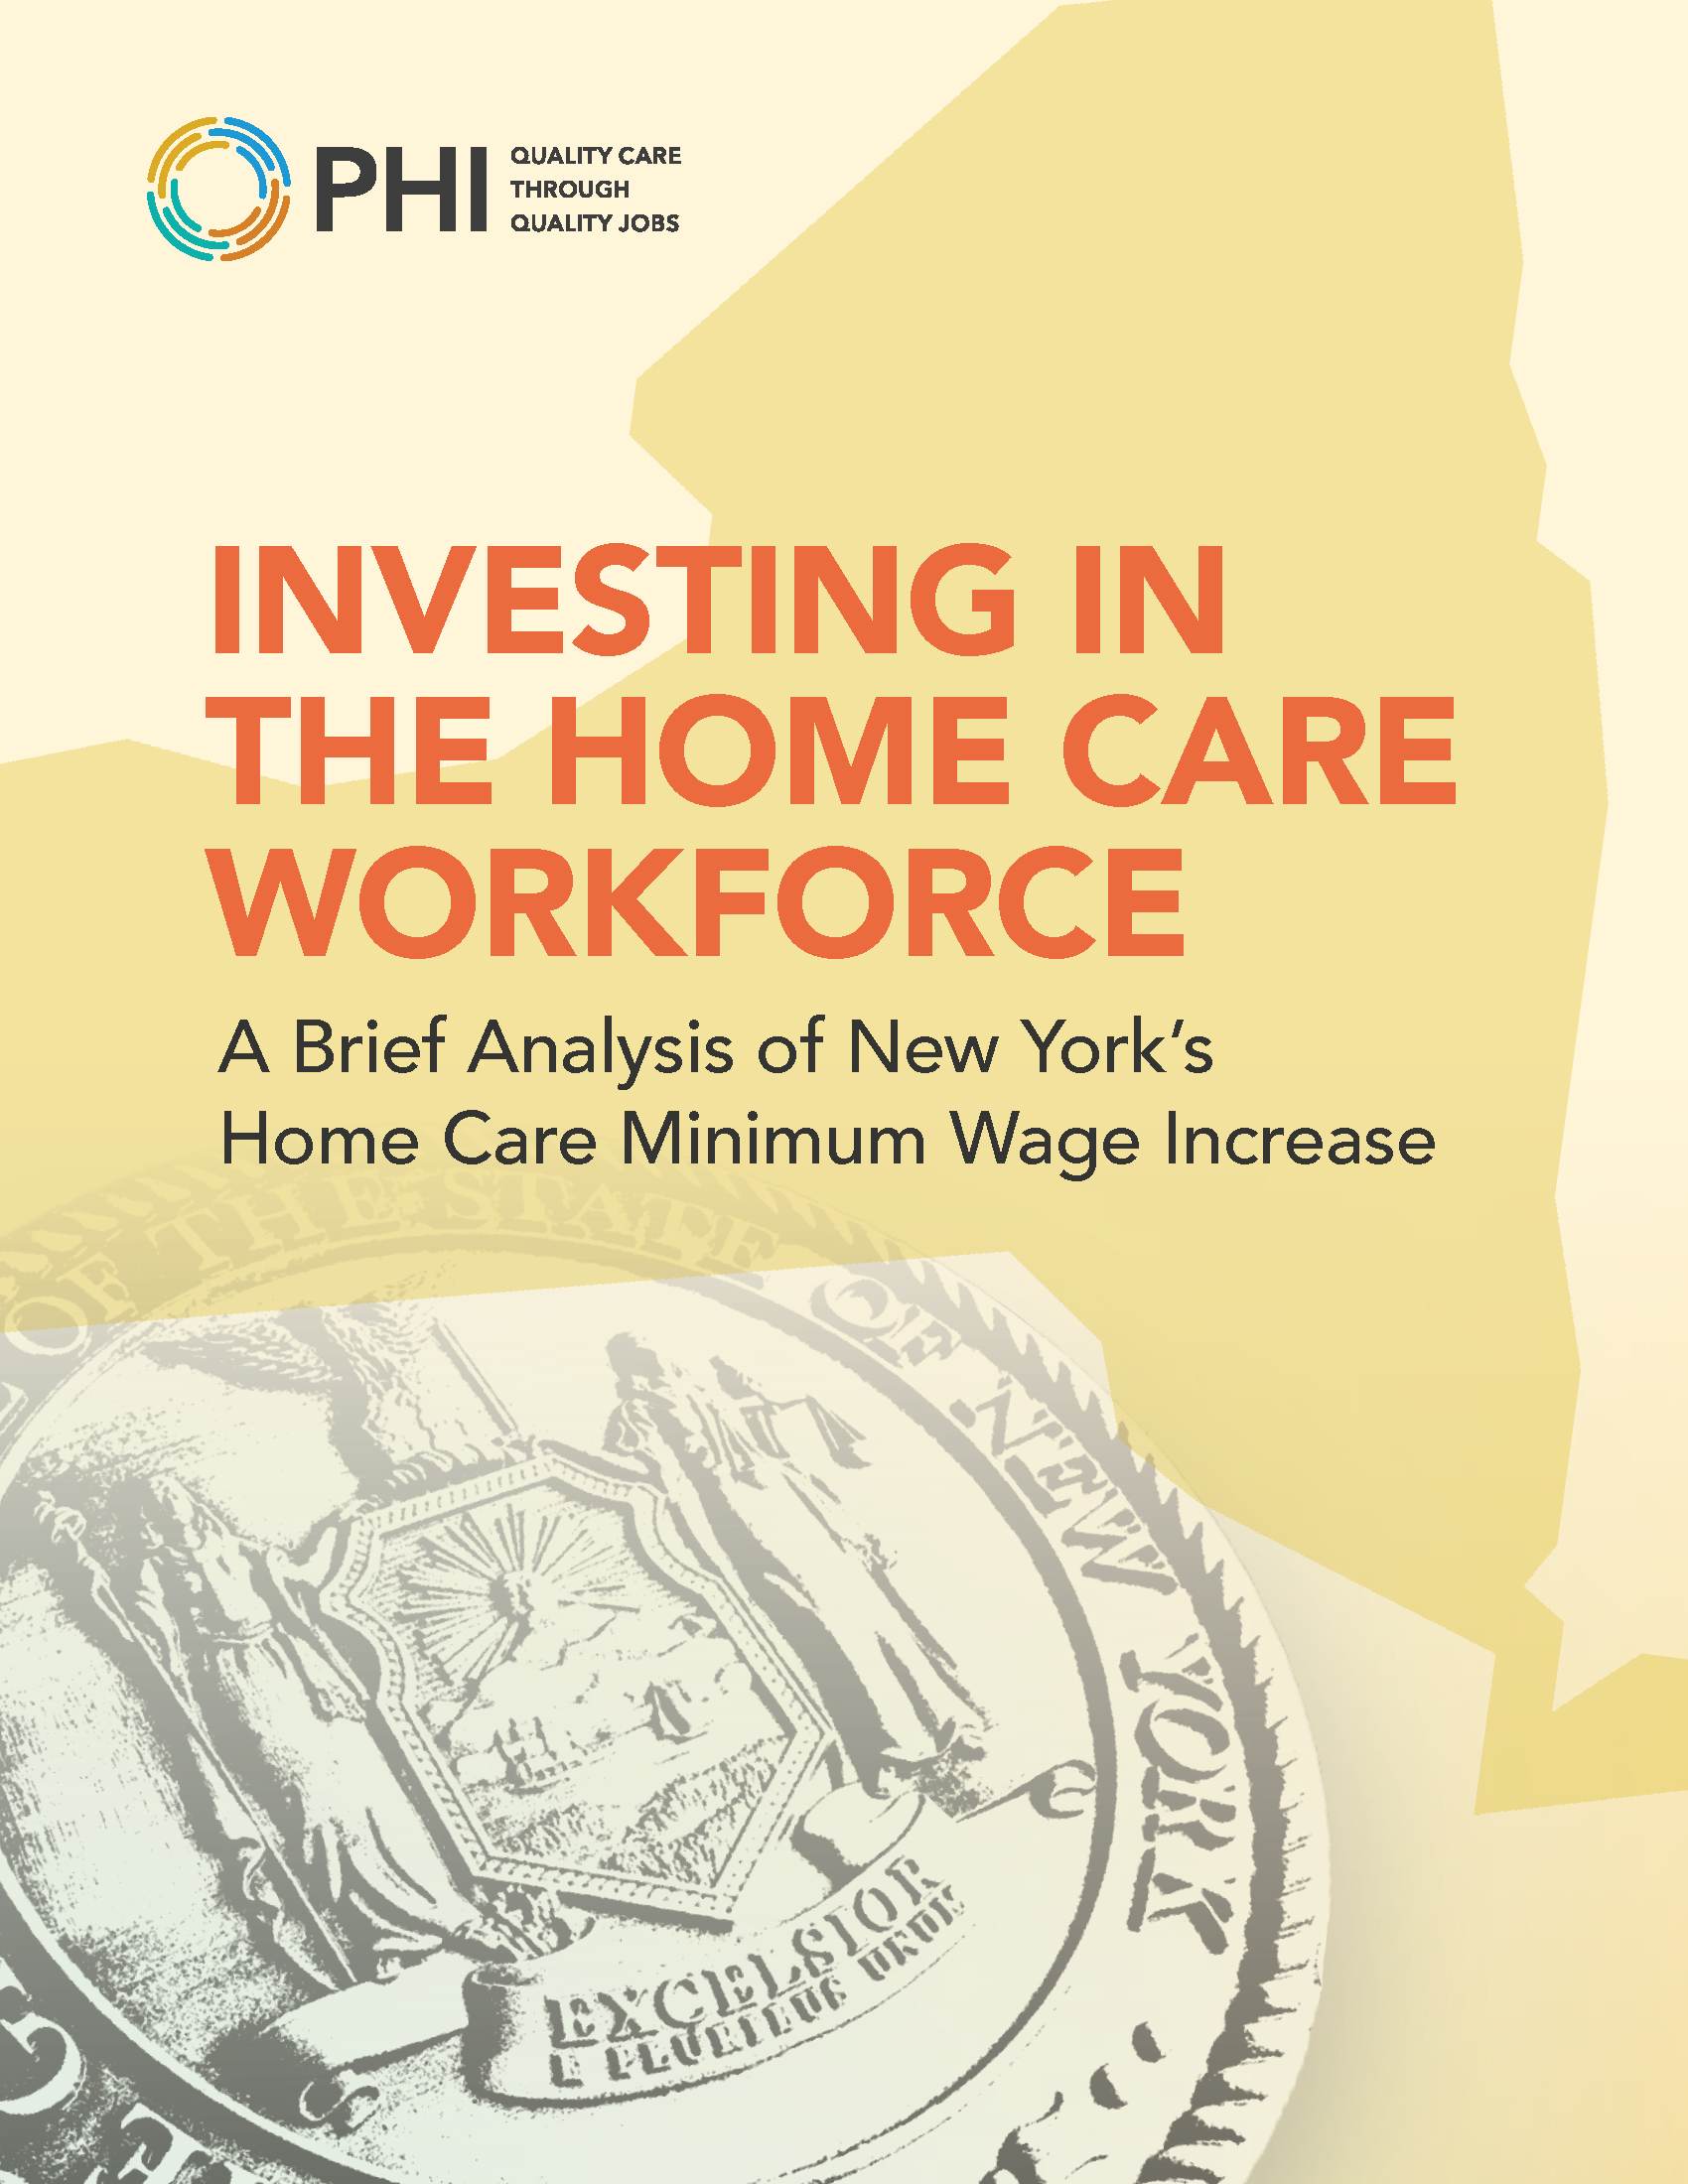 Investing in the Home Care Workforce: A Brief Analysis of New York's Home Care Minimum Wage Increase